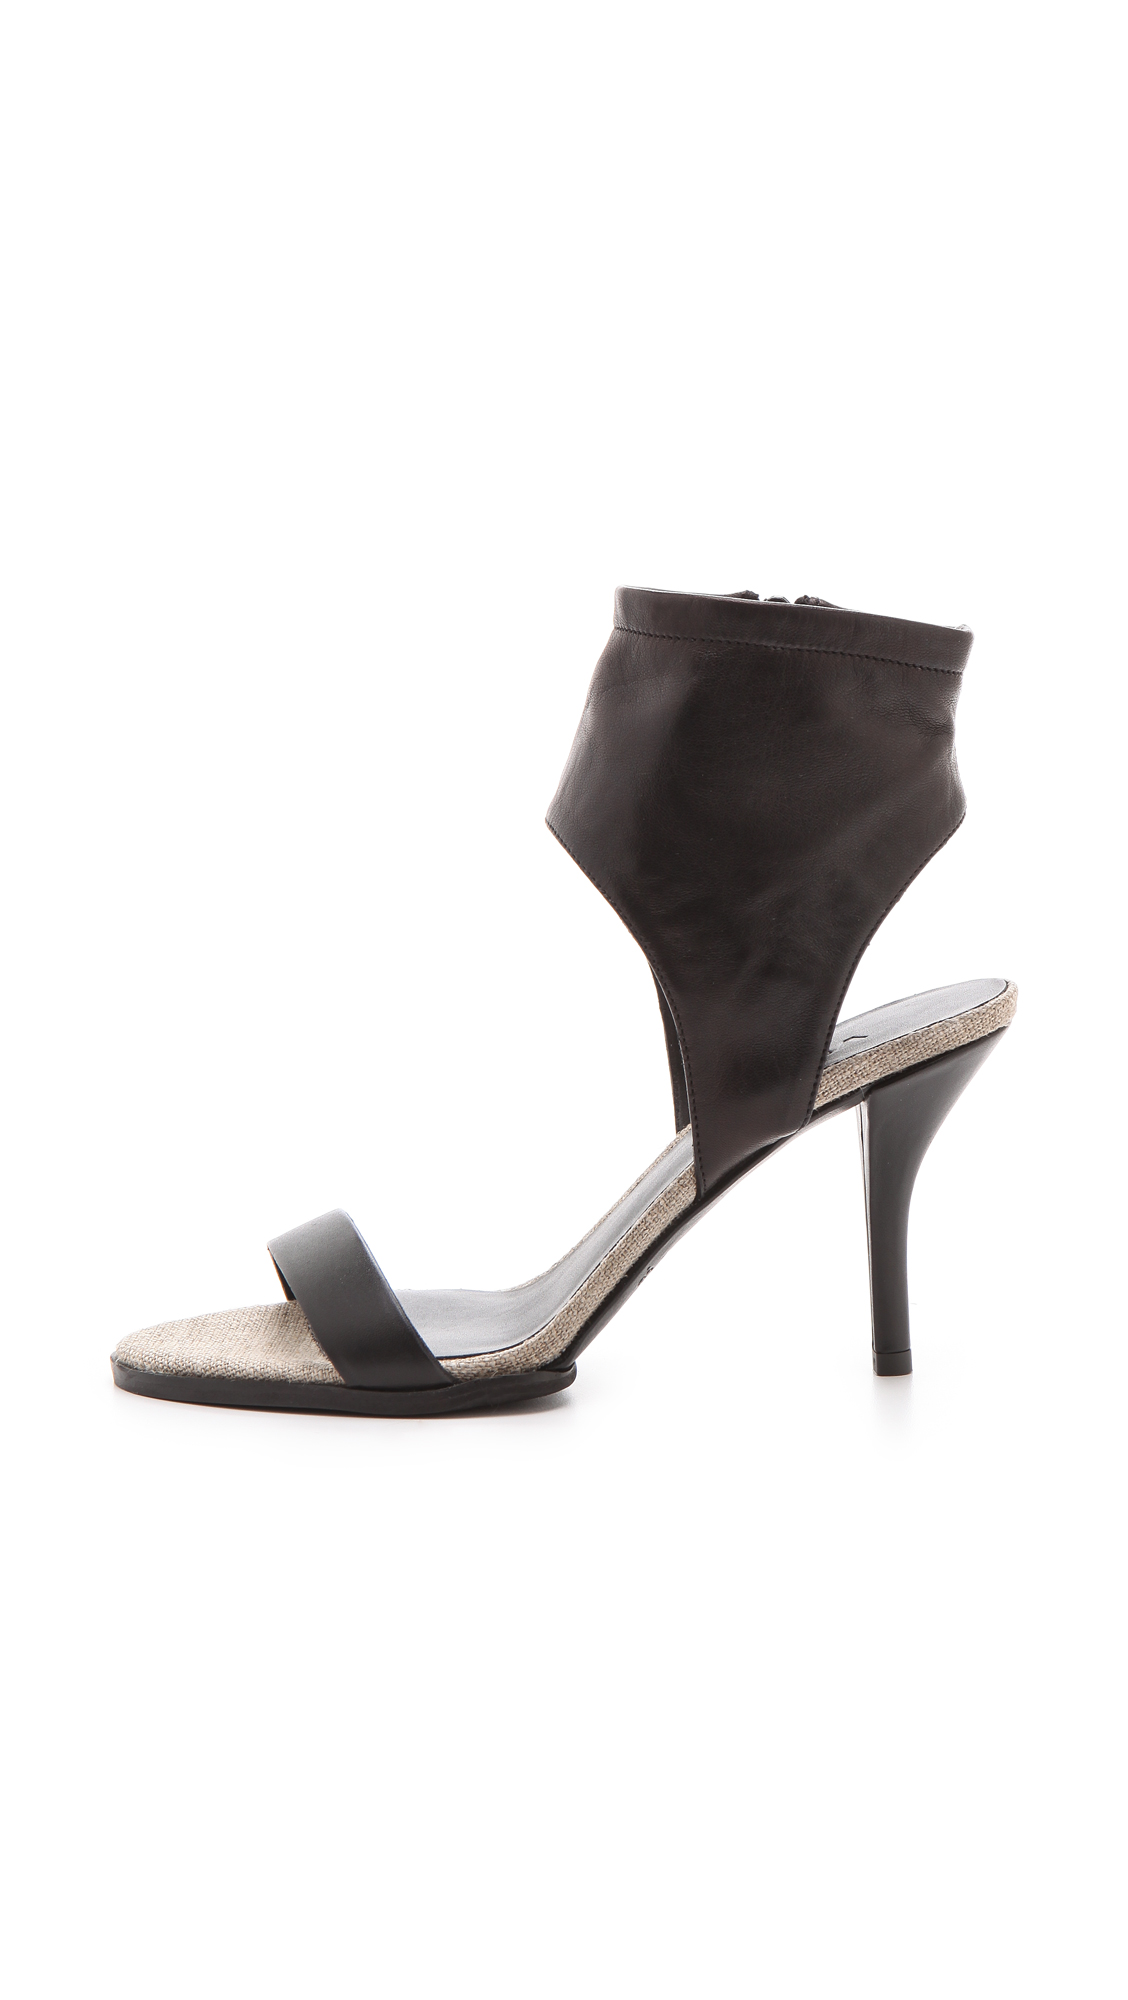 Lyst - Vince Adria Ankle Cuff Sandals in Black